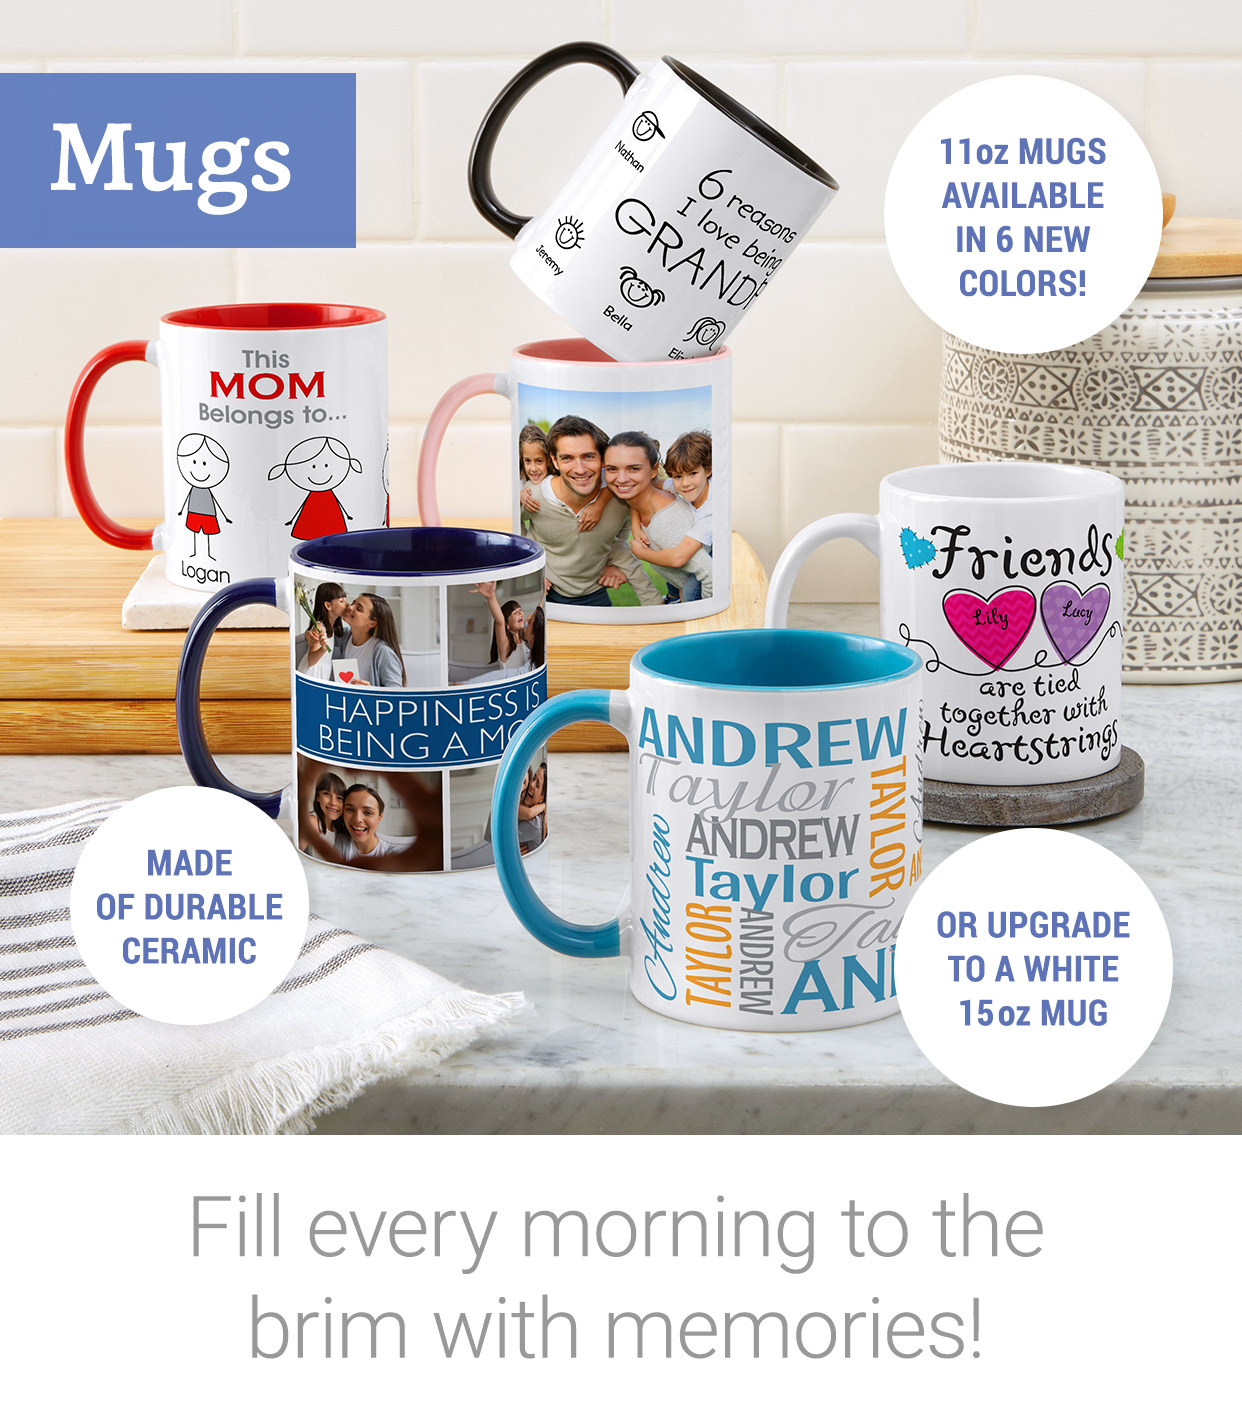 Personalized Mugs  Personal Creations